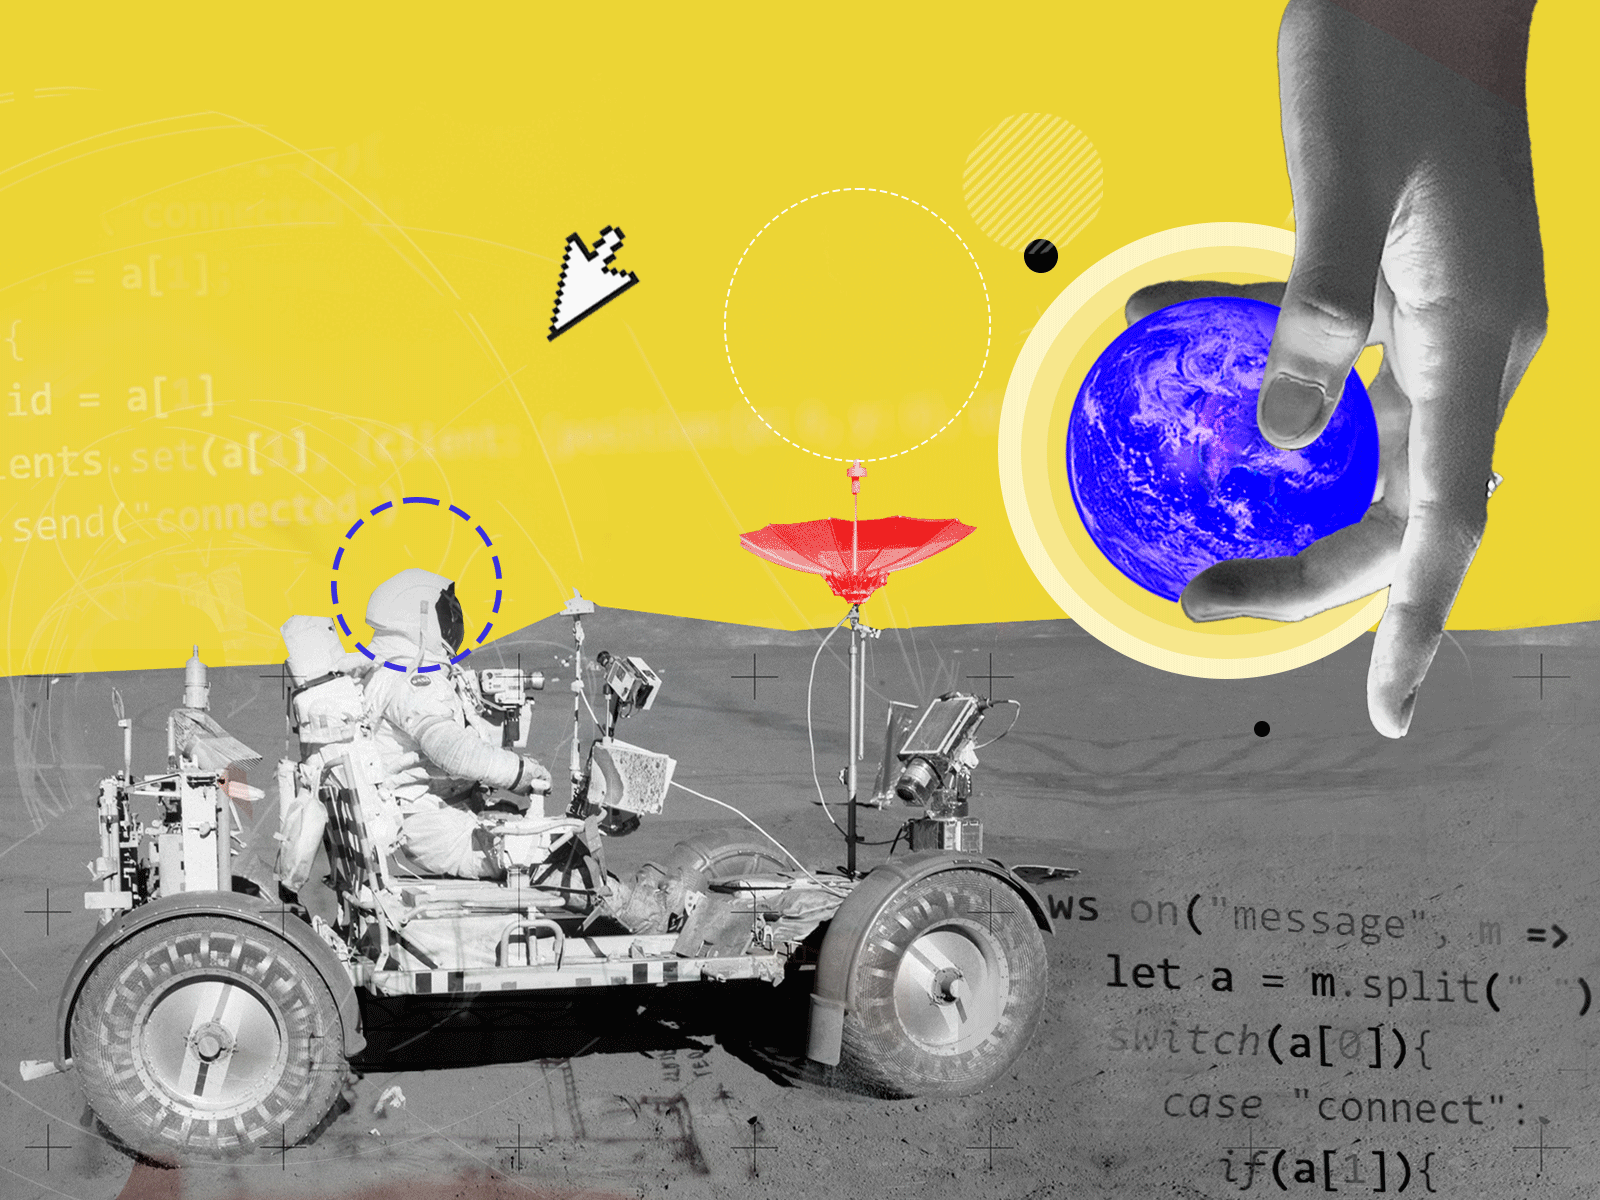 Digital product need a solution architect astronaut collage colors cover giff illustration moon planet poster space ui yellow